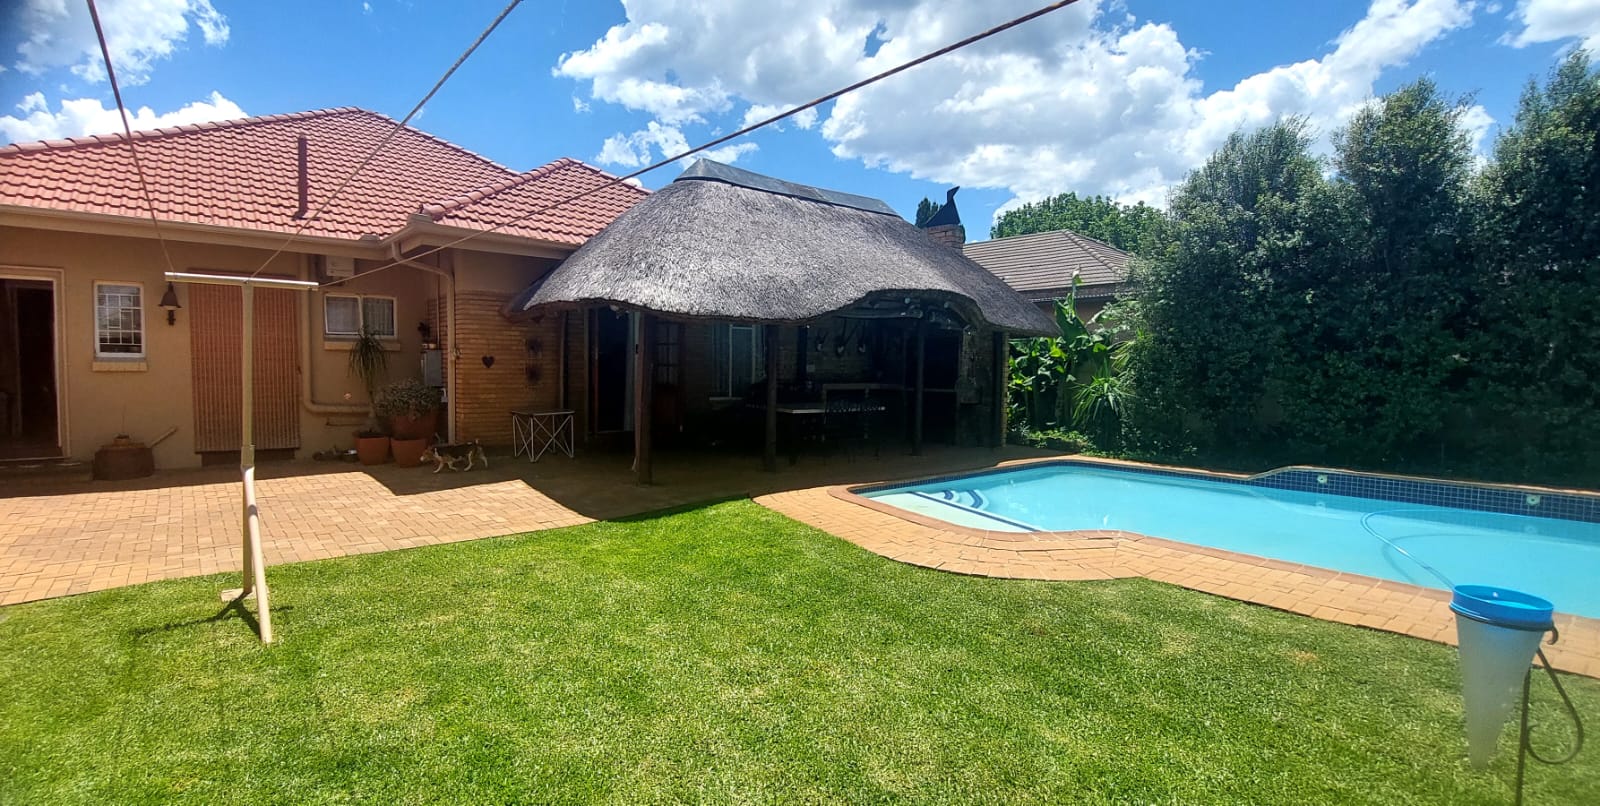 House in Potchefstroom Central - 208a6480-db35-4d9d-a87c-991fcc9ca84d.jpg